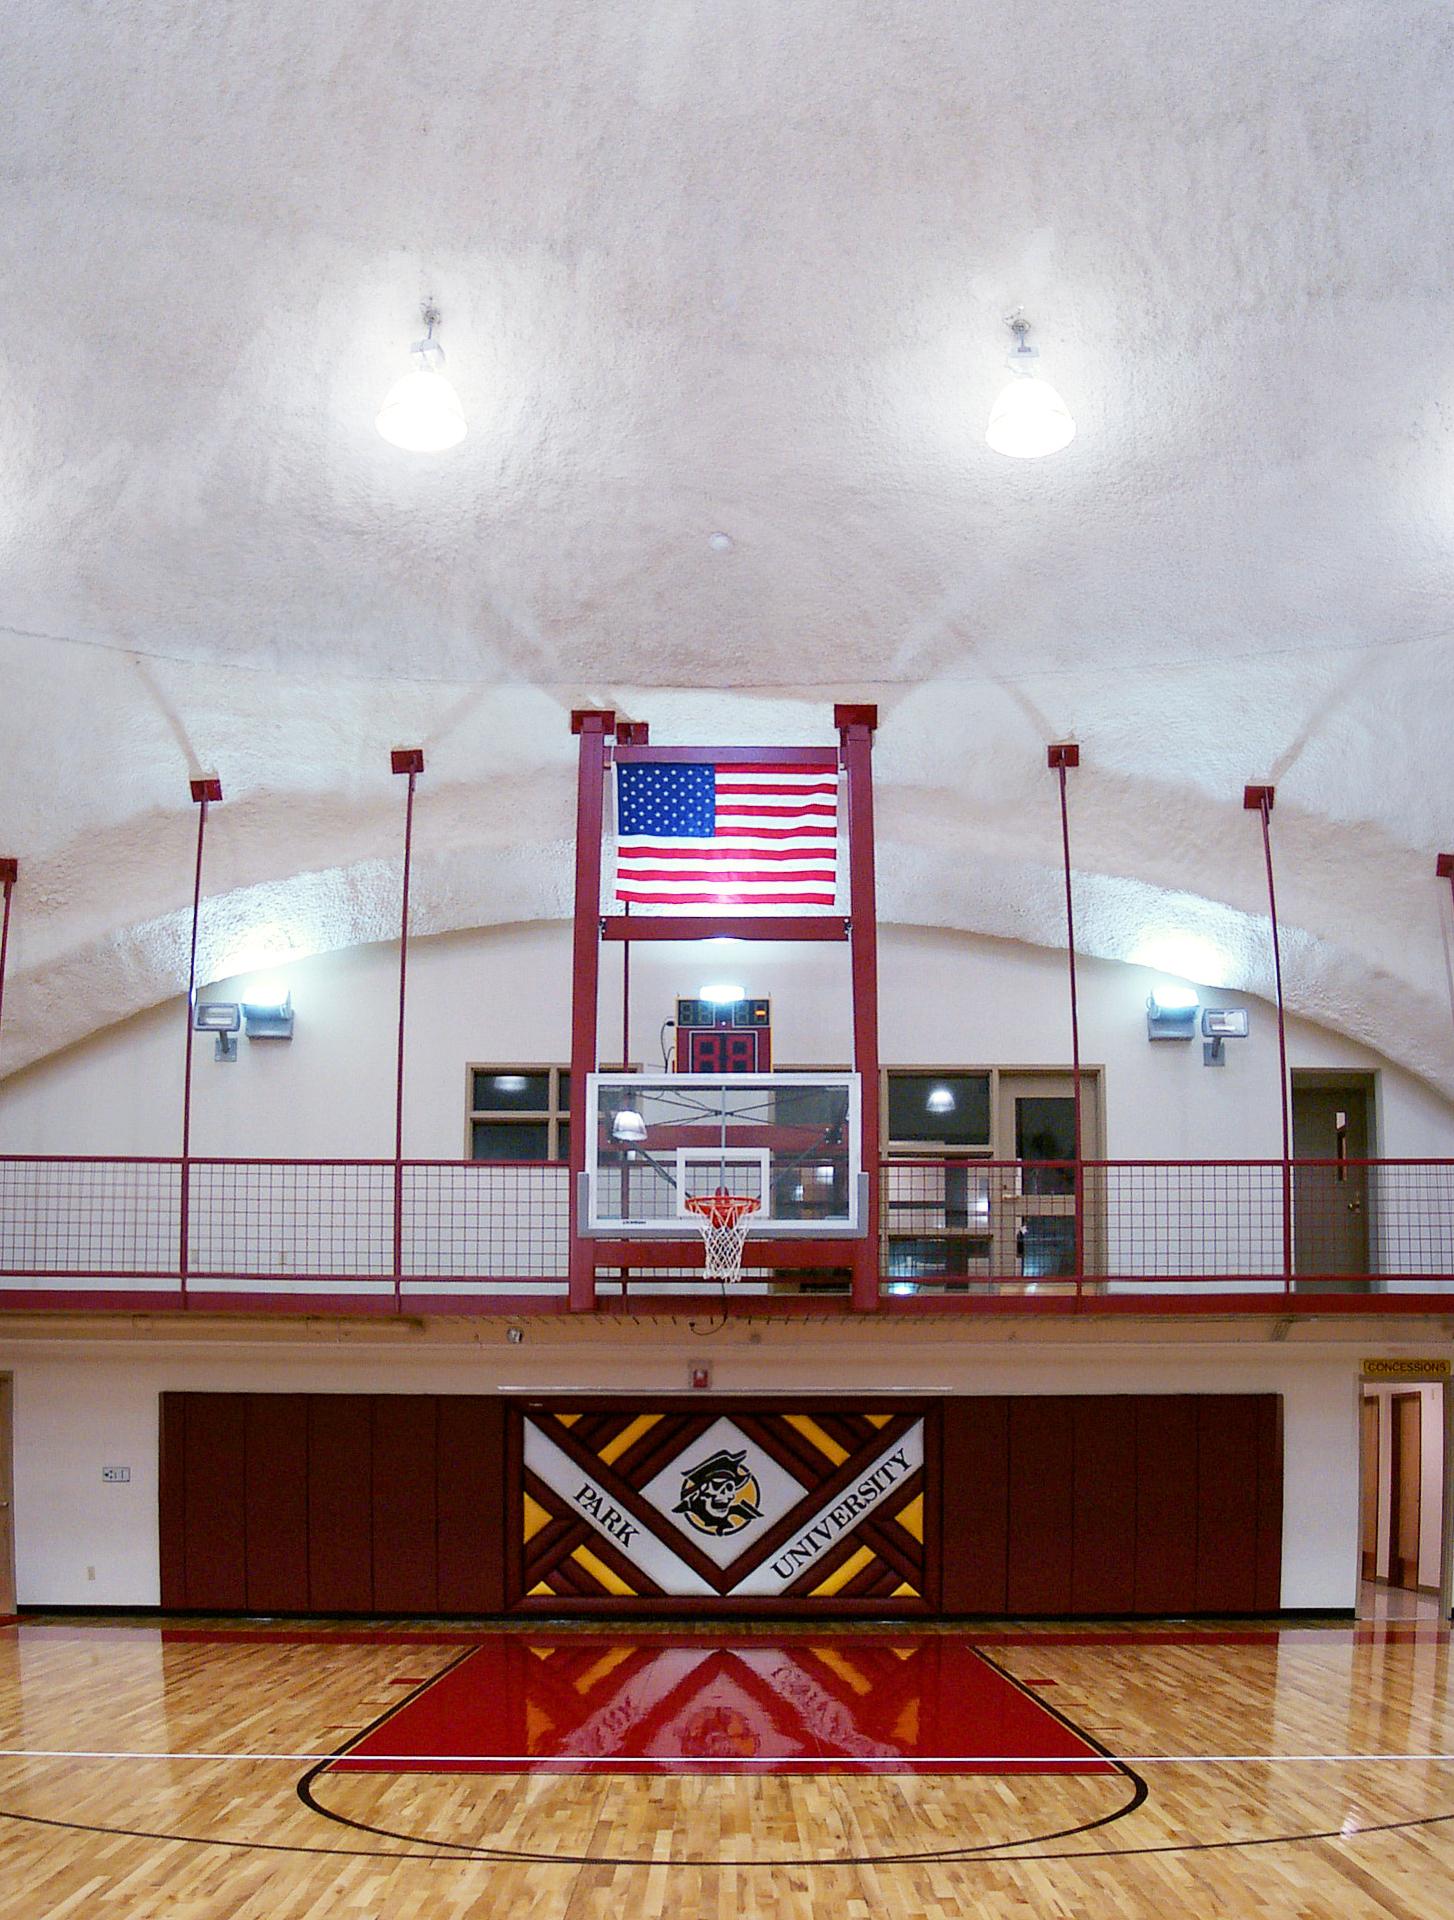 The basketball key in the performance gymnasium.